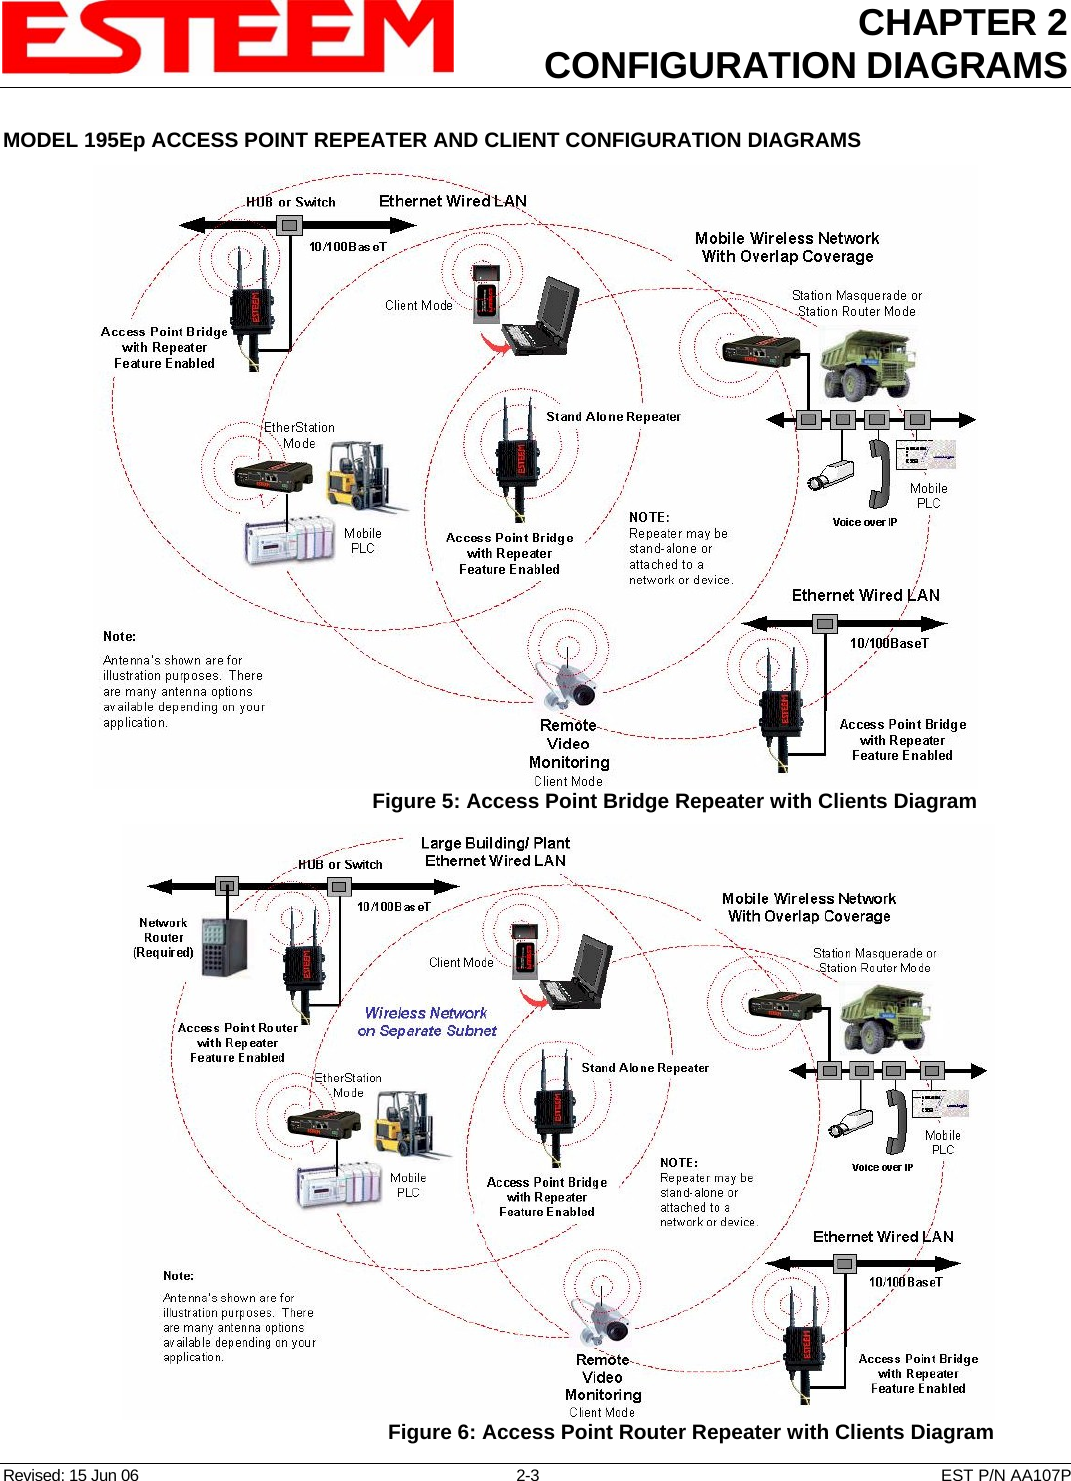 CHAPTER 2 CONFIGURATION DIAGRAMS   Revised: 15 Jun 06  2-3  EST P/N AA107P MODEL 195Ep ACCESS POINT REPEATER AND CLIENT CONFIGURATION DIAGRAMS  Figure 5: Access Point Bridge Repeater with Clients Diagram Figure 6: Access Point Router Repeater with Clients Diagram